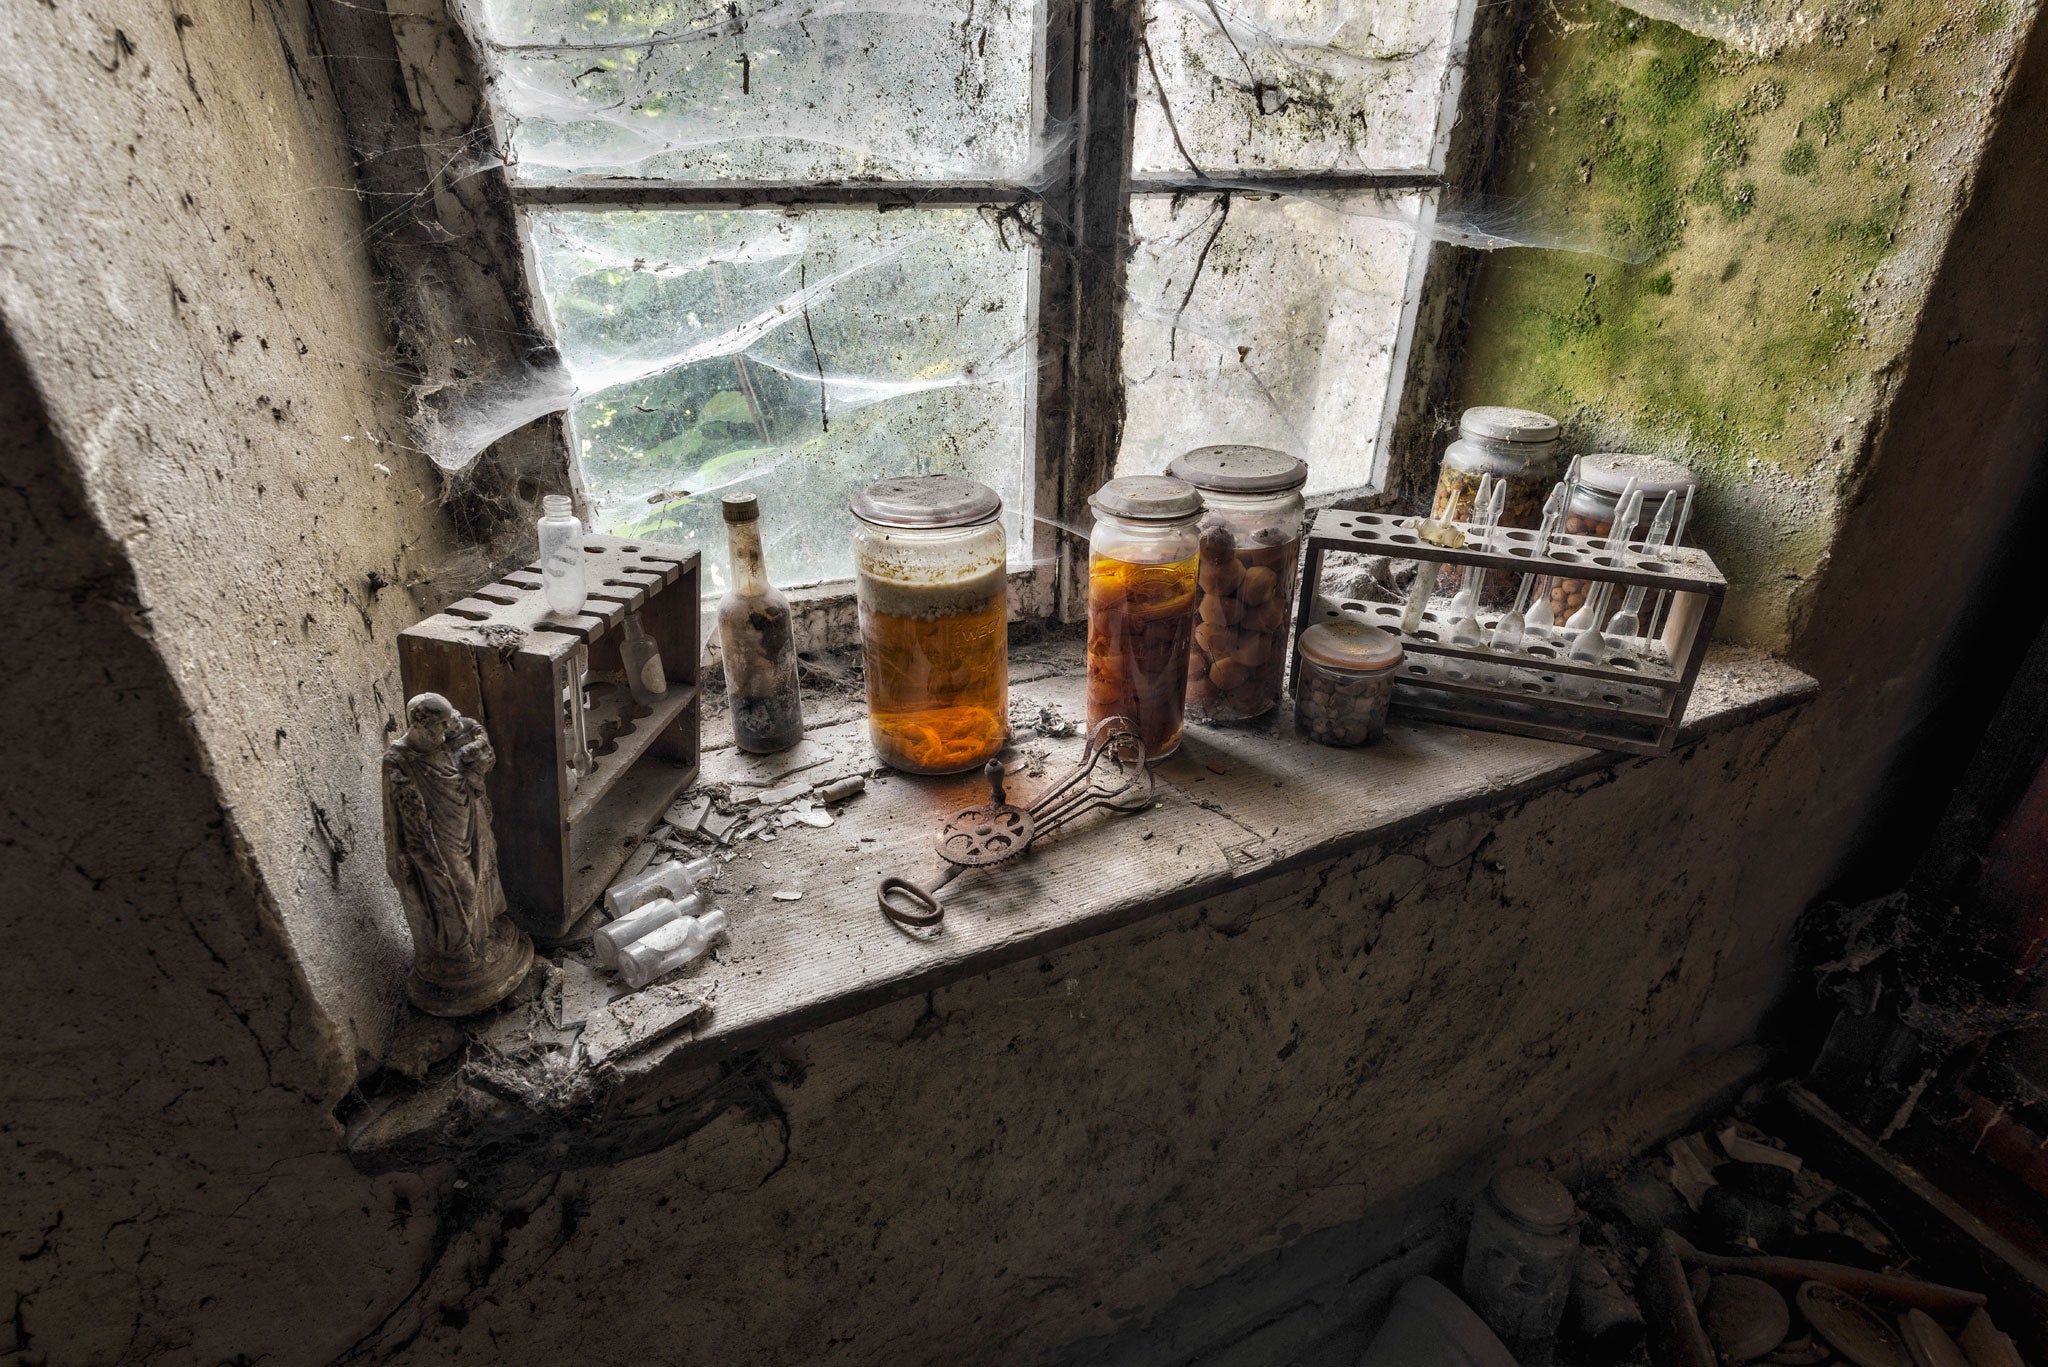 This image was taken in a disused house in Luxembourg in 2013. Inside the browning jars are cherries; the entire room was filled with them